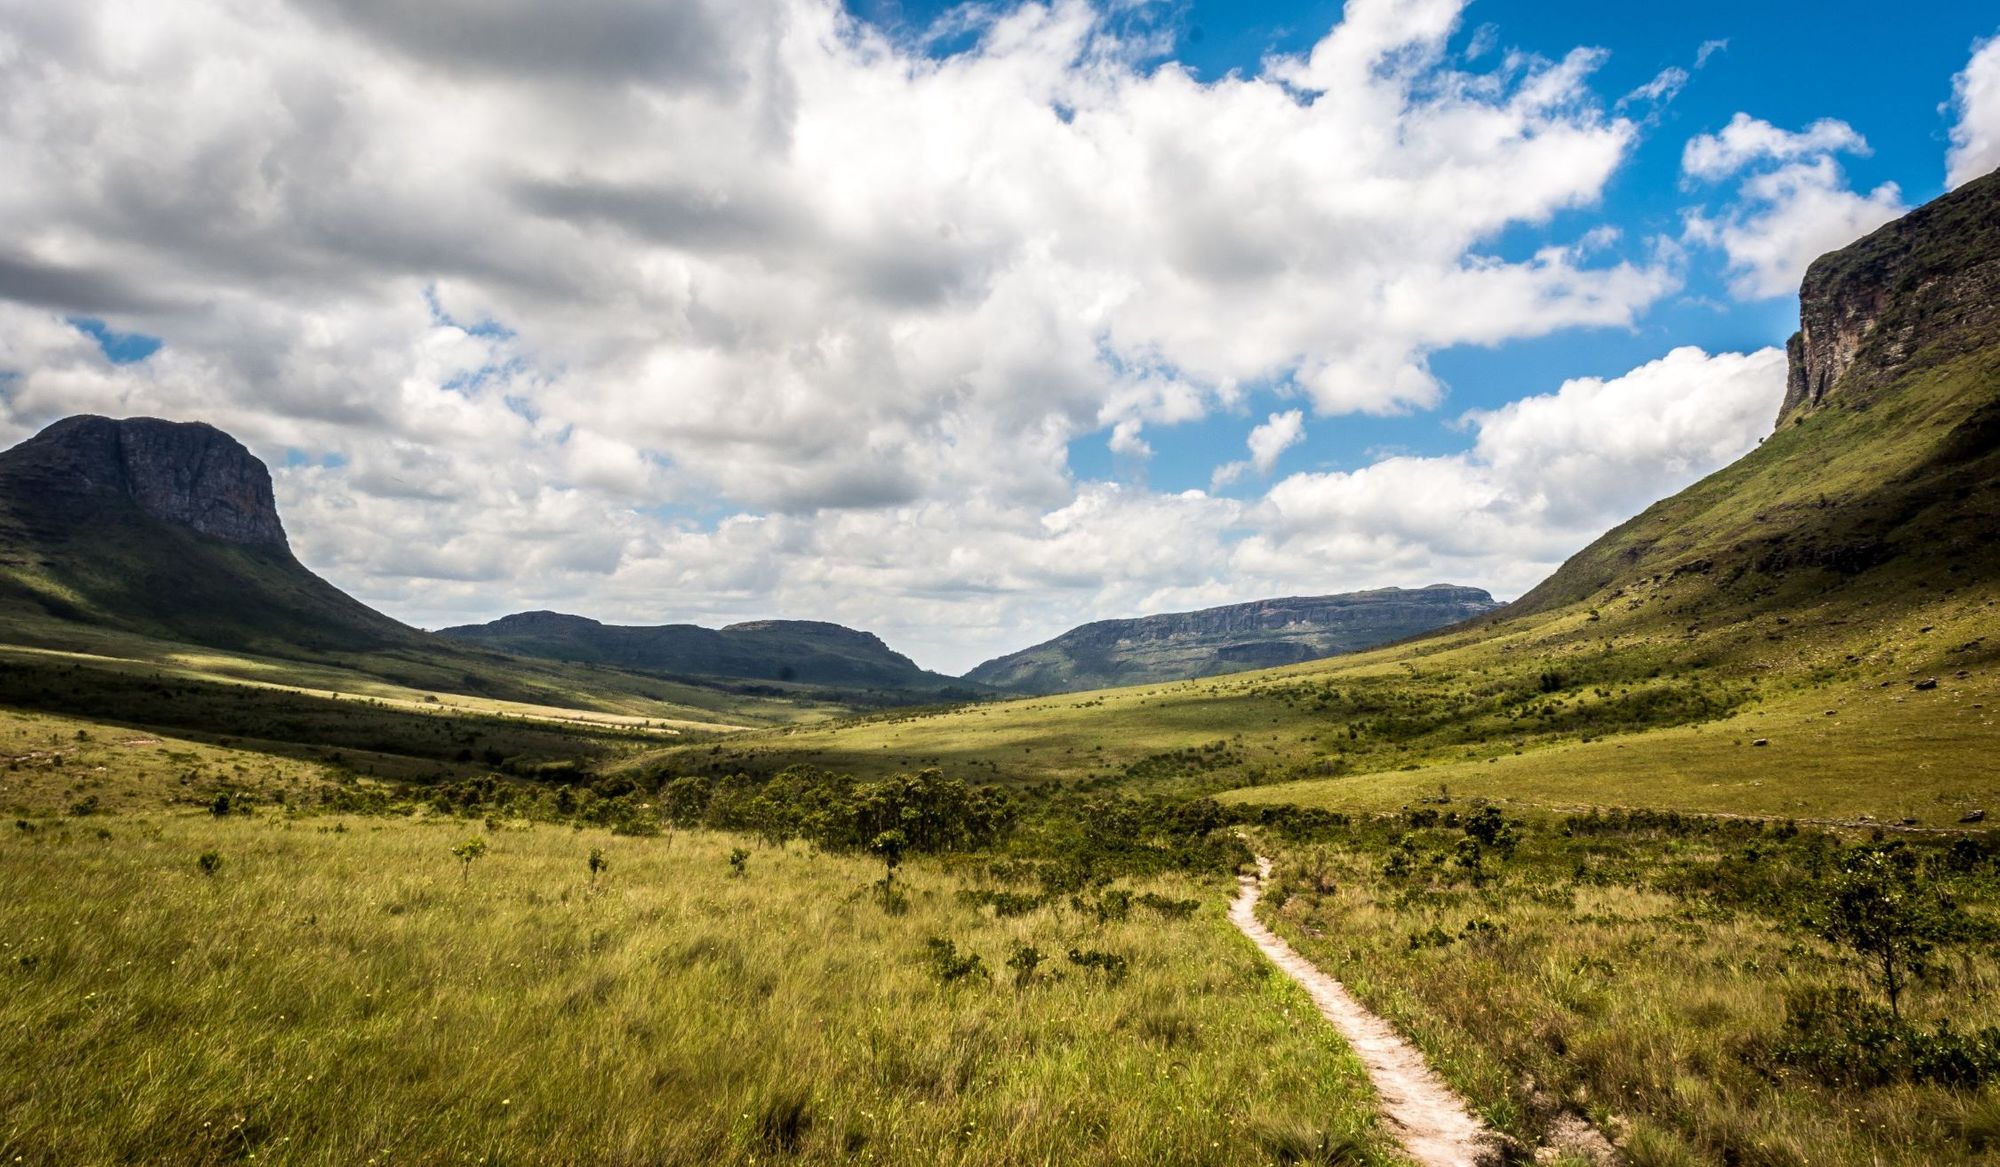 The plains of Gerais wind through surroundings reminiscent of Patagonia. Photo: Getty